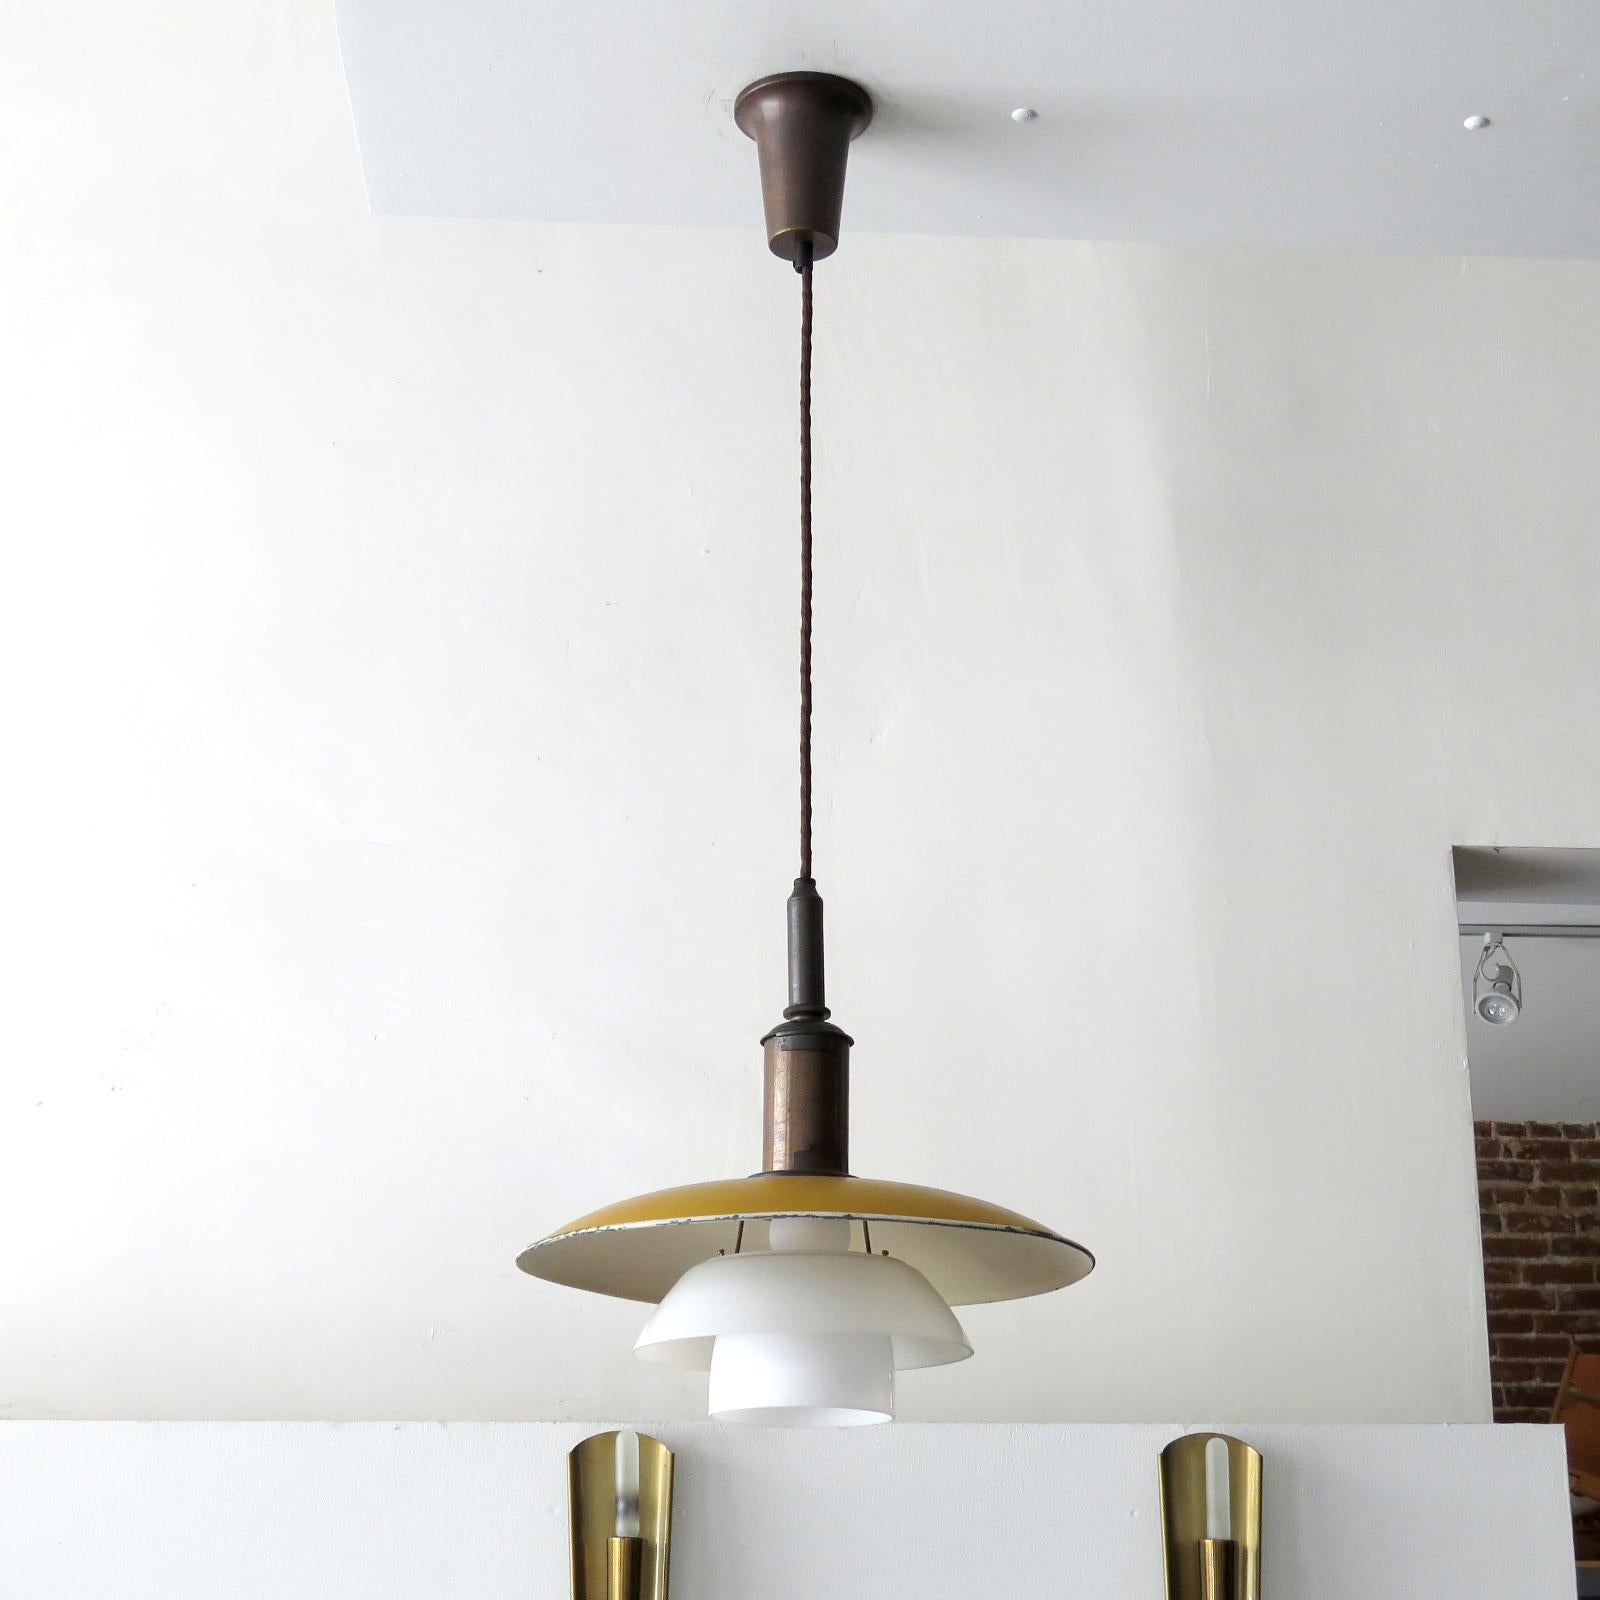 Rare 1930s PH-3.5/2 pendant light by Poul Henningsen for Louis Poulsen from 1930 with original shade set, top shade in dark yellow/orange painted metal and two double-layer opaline glass shades on the original copper bayonet socket housing, matching